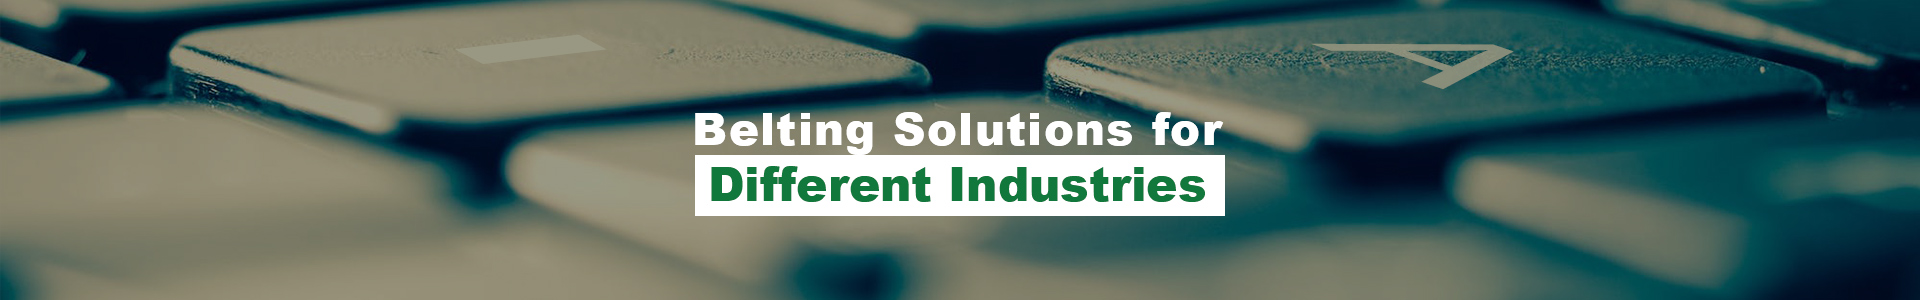 Belting Solutions for Different Industries